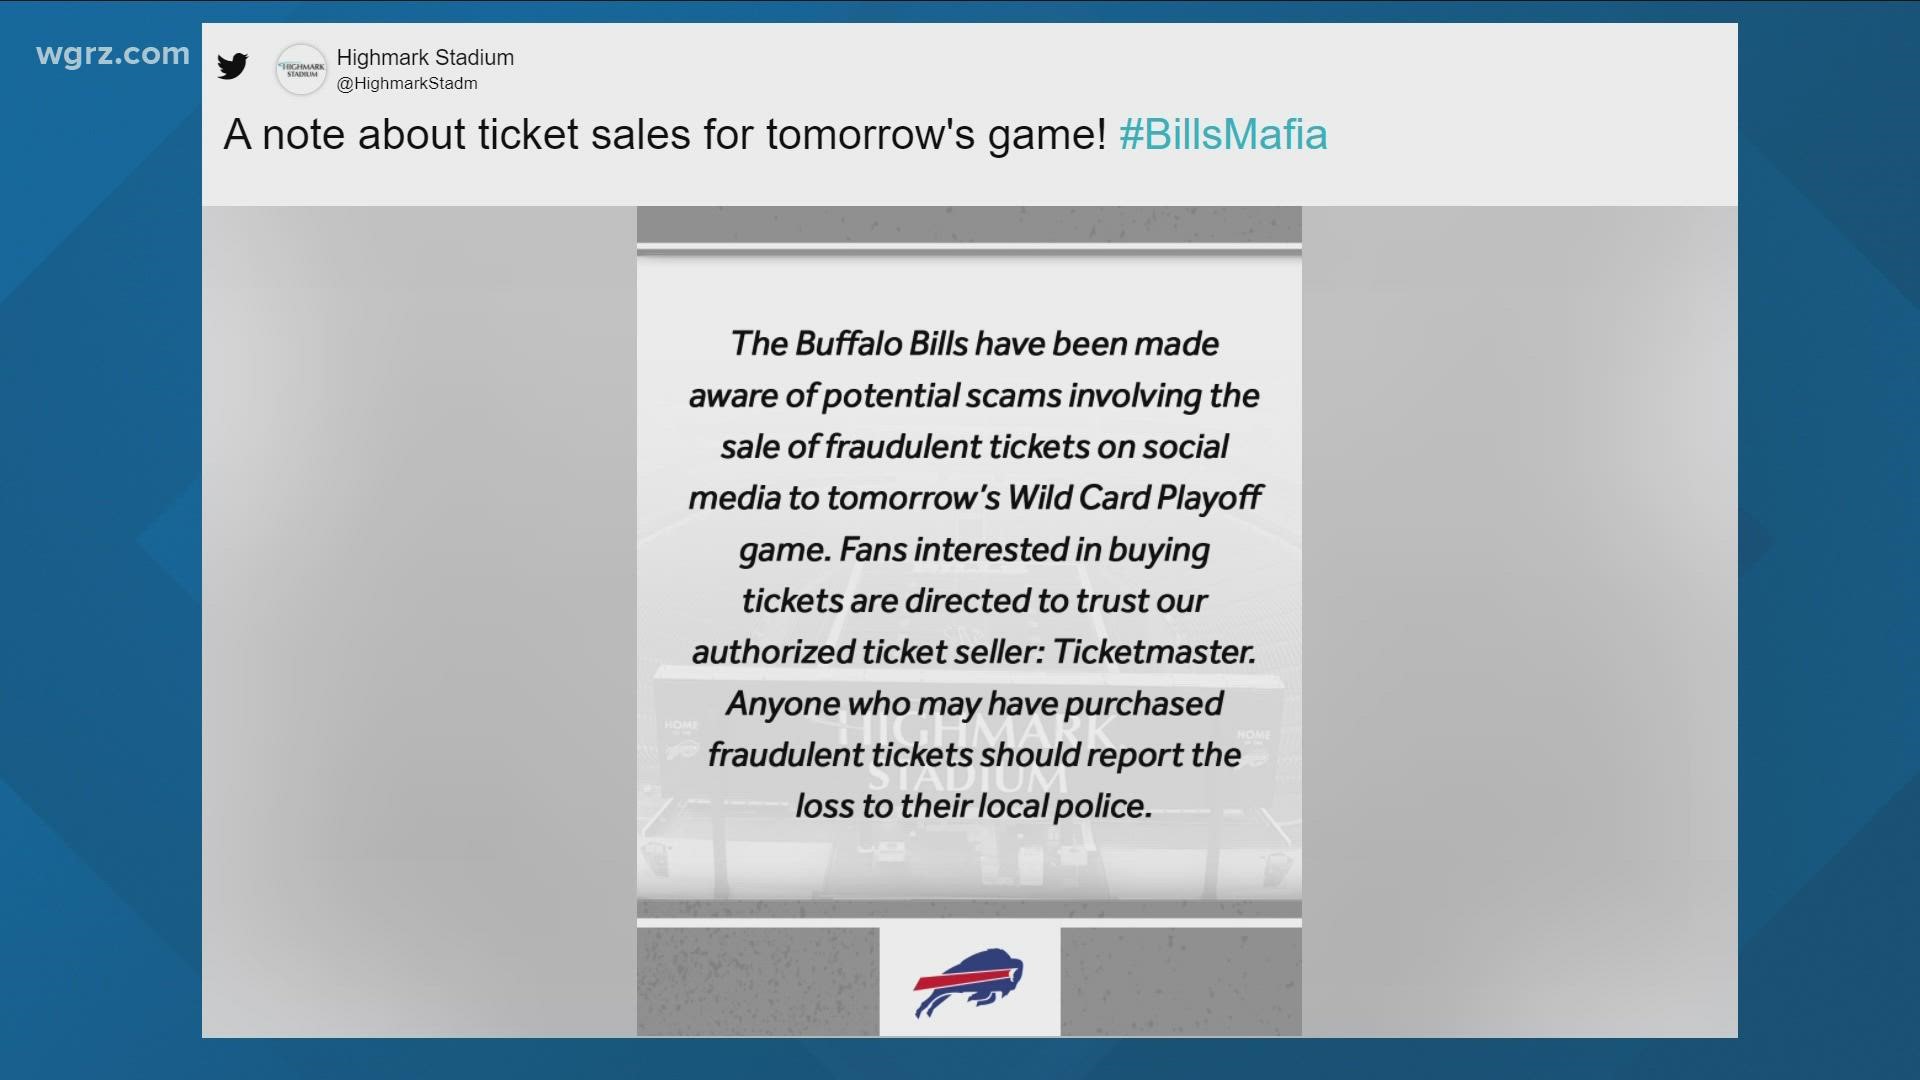 The Bills warning people about fraudulent tickets being sold